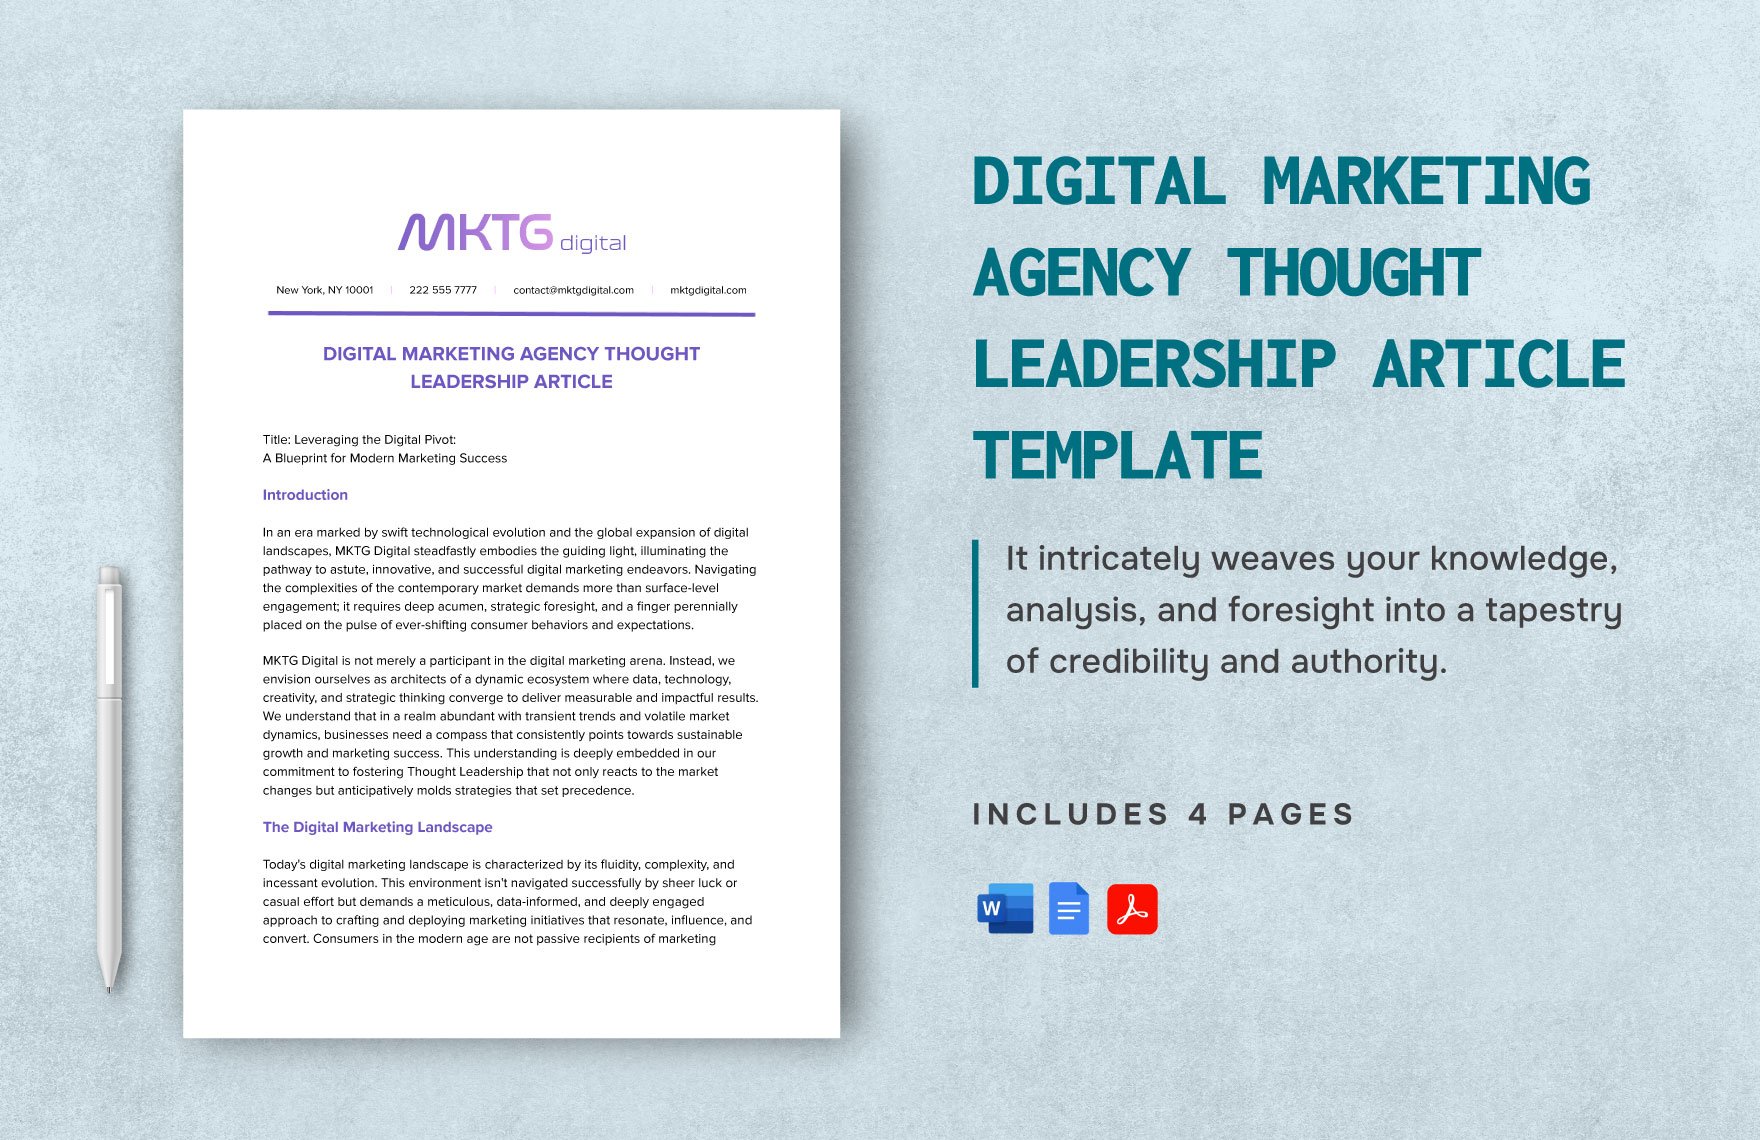 Digital Marketing Agency Thought Leadership Article Template in Word, Google Docs, PDF